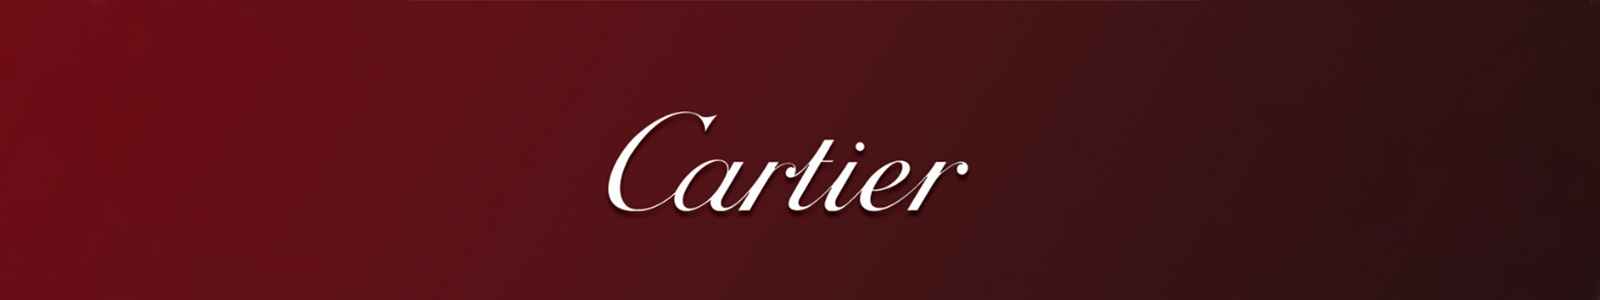 Cartier Watches and Sunglasses - The Key to Looking High-Class